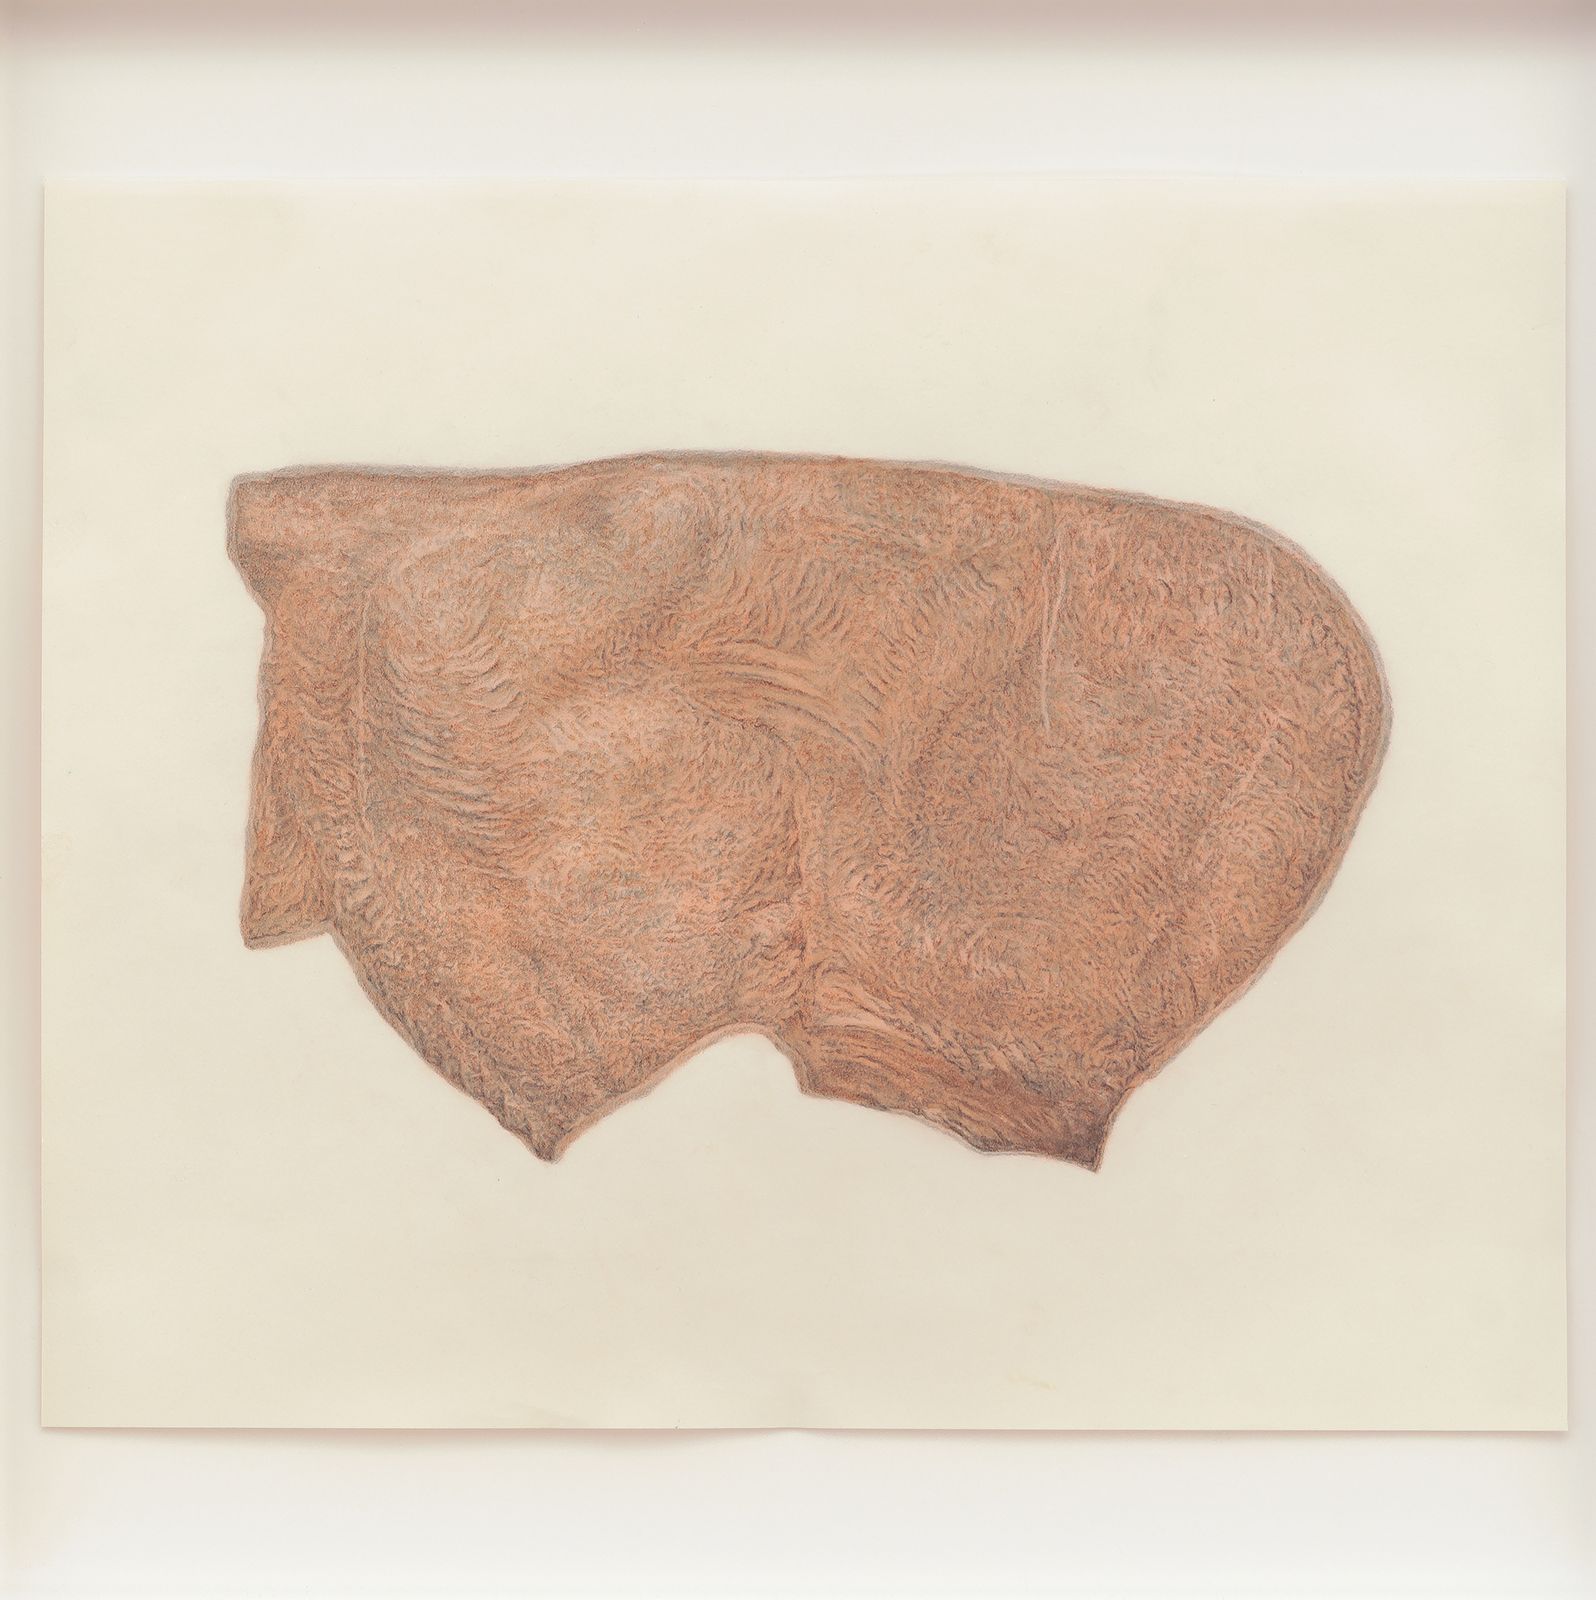 Michael Wang, UNTITLED FRAGMENT (WISENTDENKMAL), 2012, graphite and red bole on paper, 15 × 18 in.